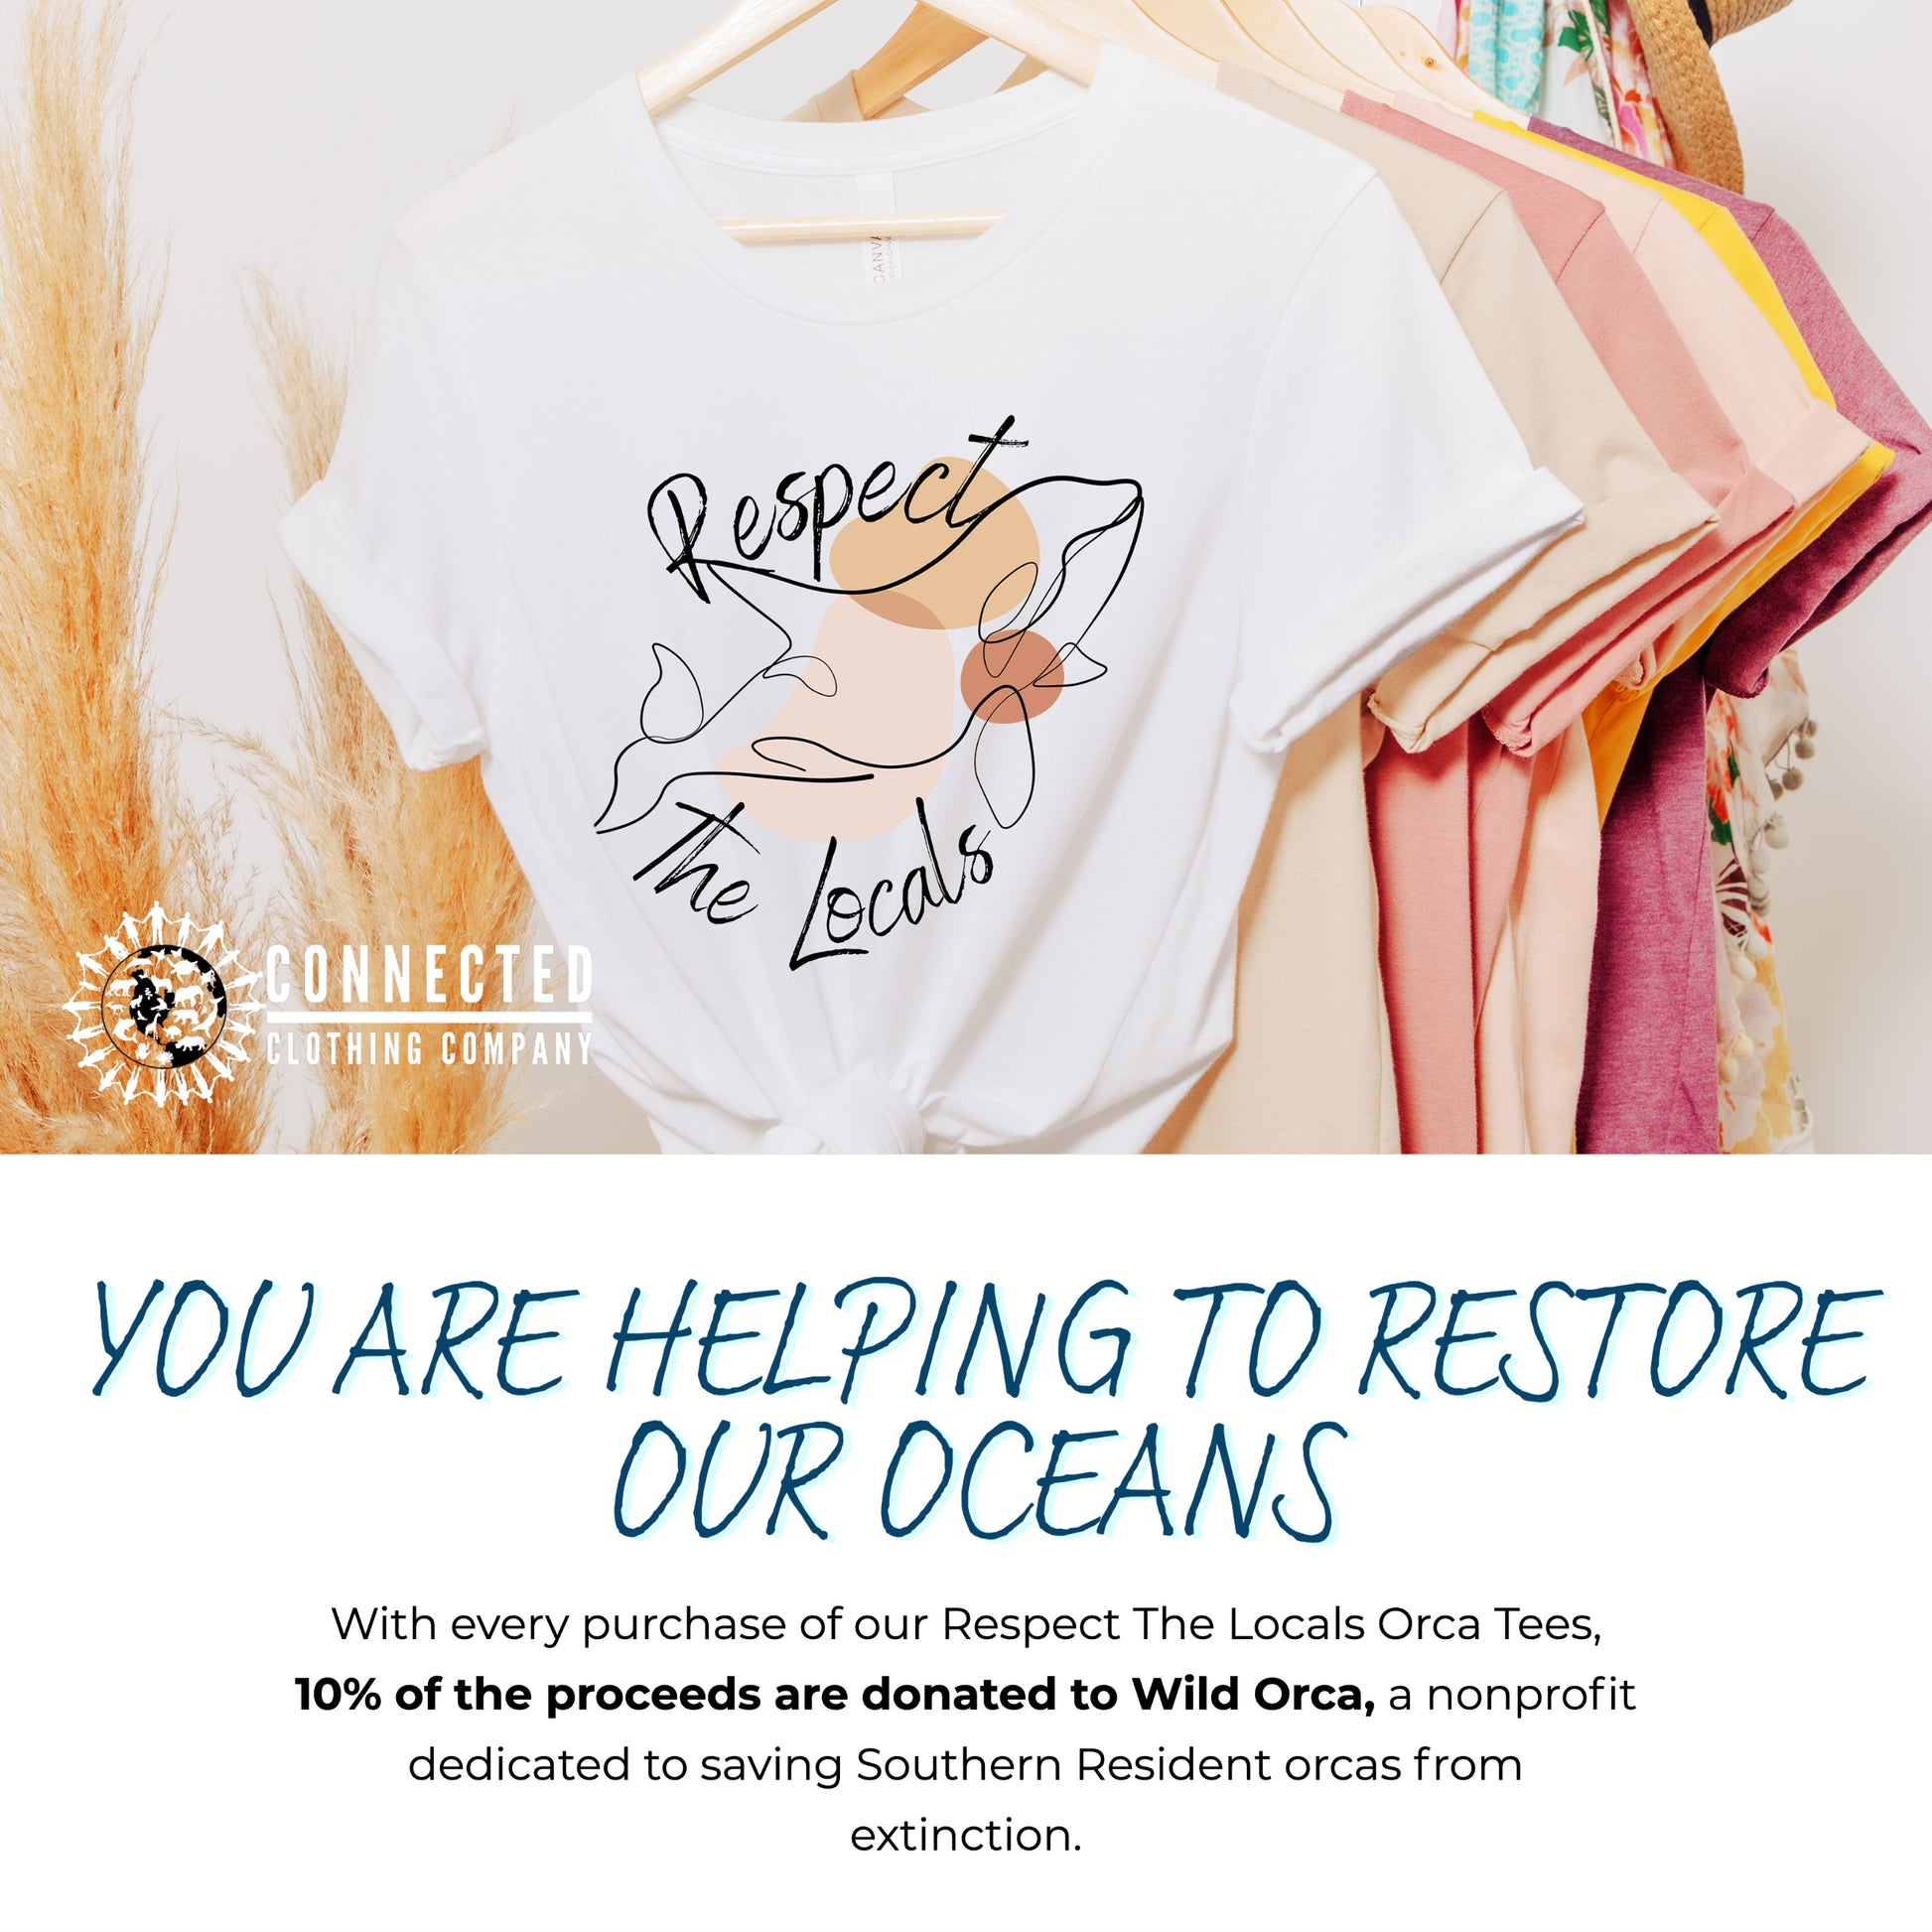 You are helping to restore our oceans. With every purchase of our respect the locals orca tees, 10% of the proceeds are donated to Wild Orca, a nonprofit dedicated to saving southern resident orcas from extinction.